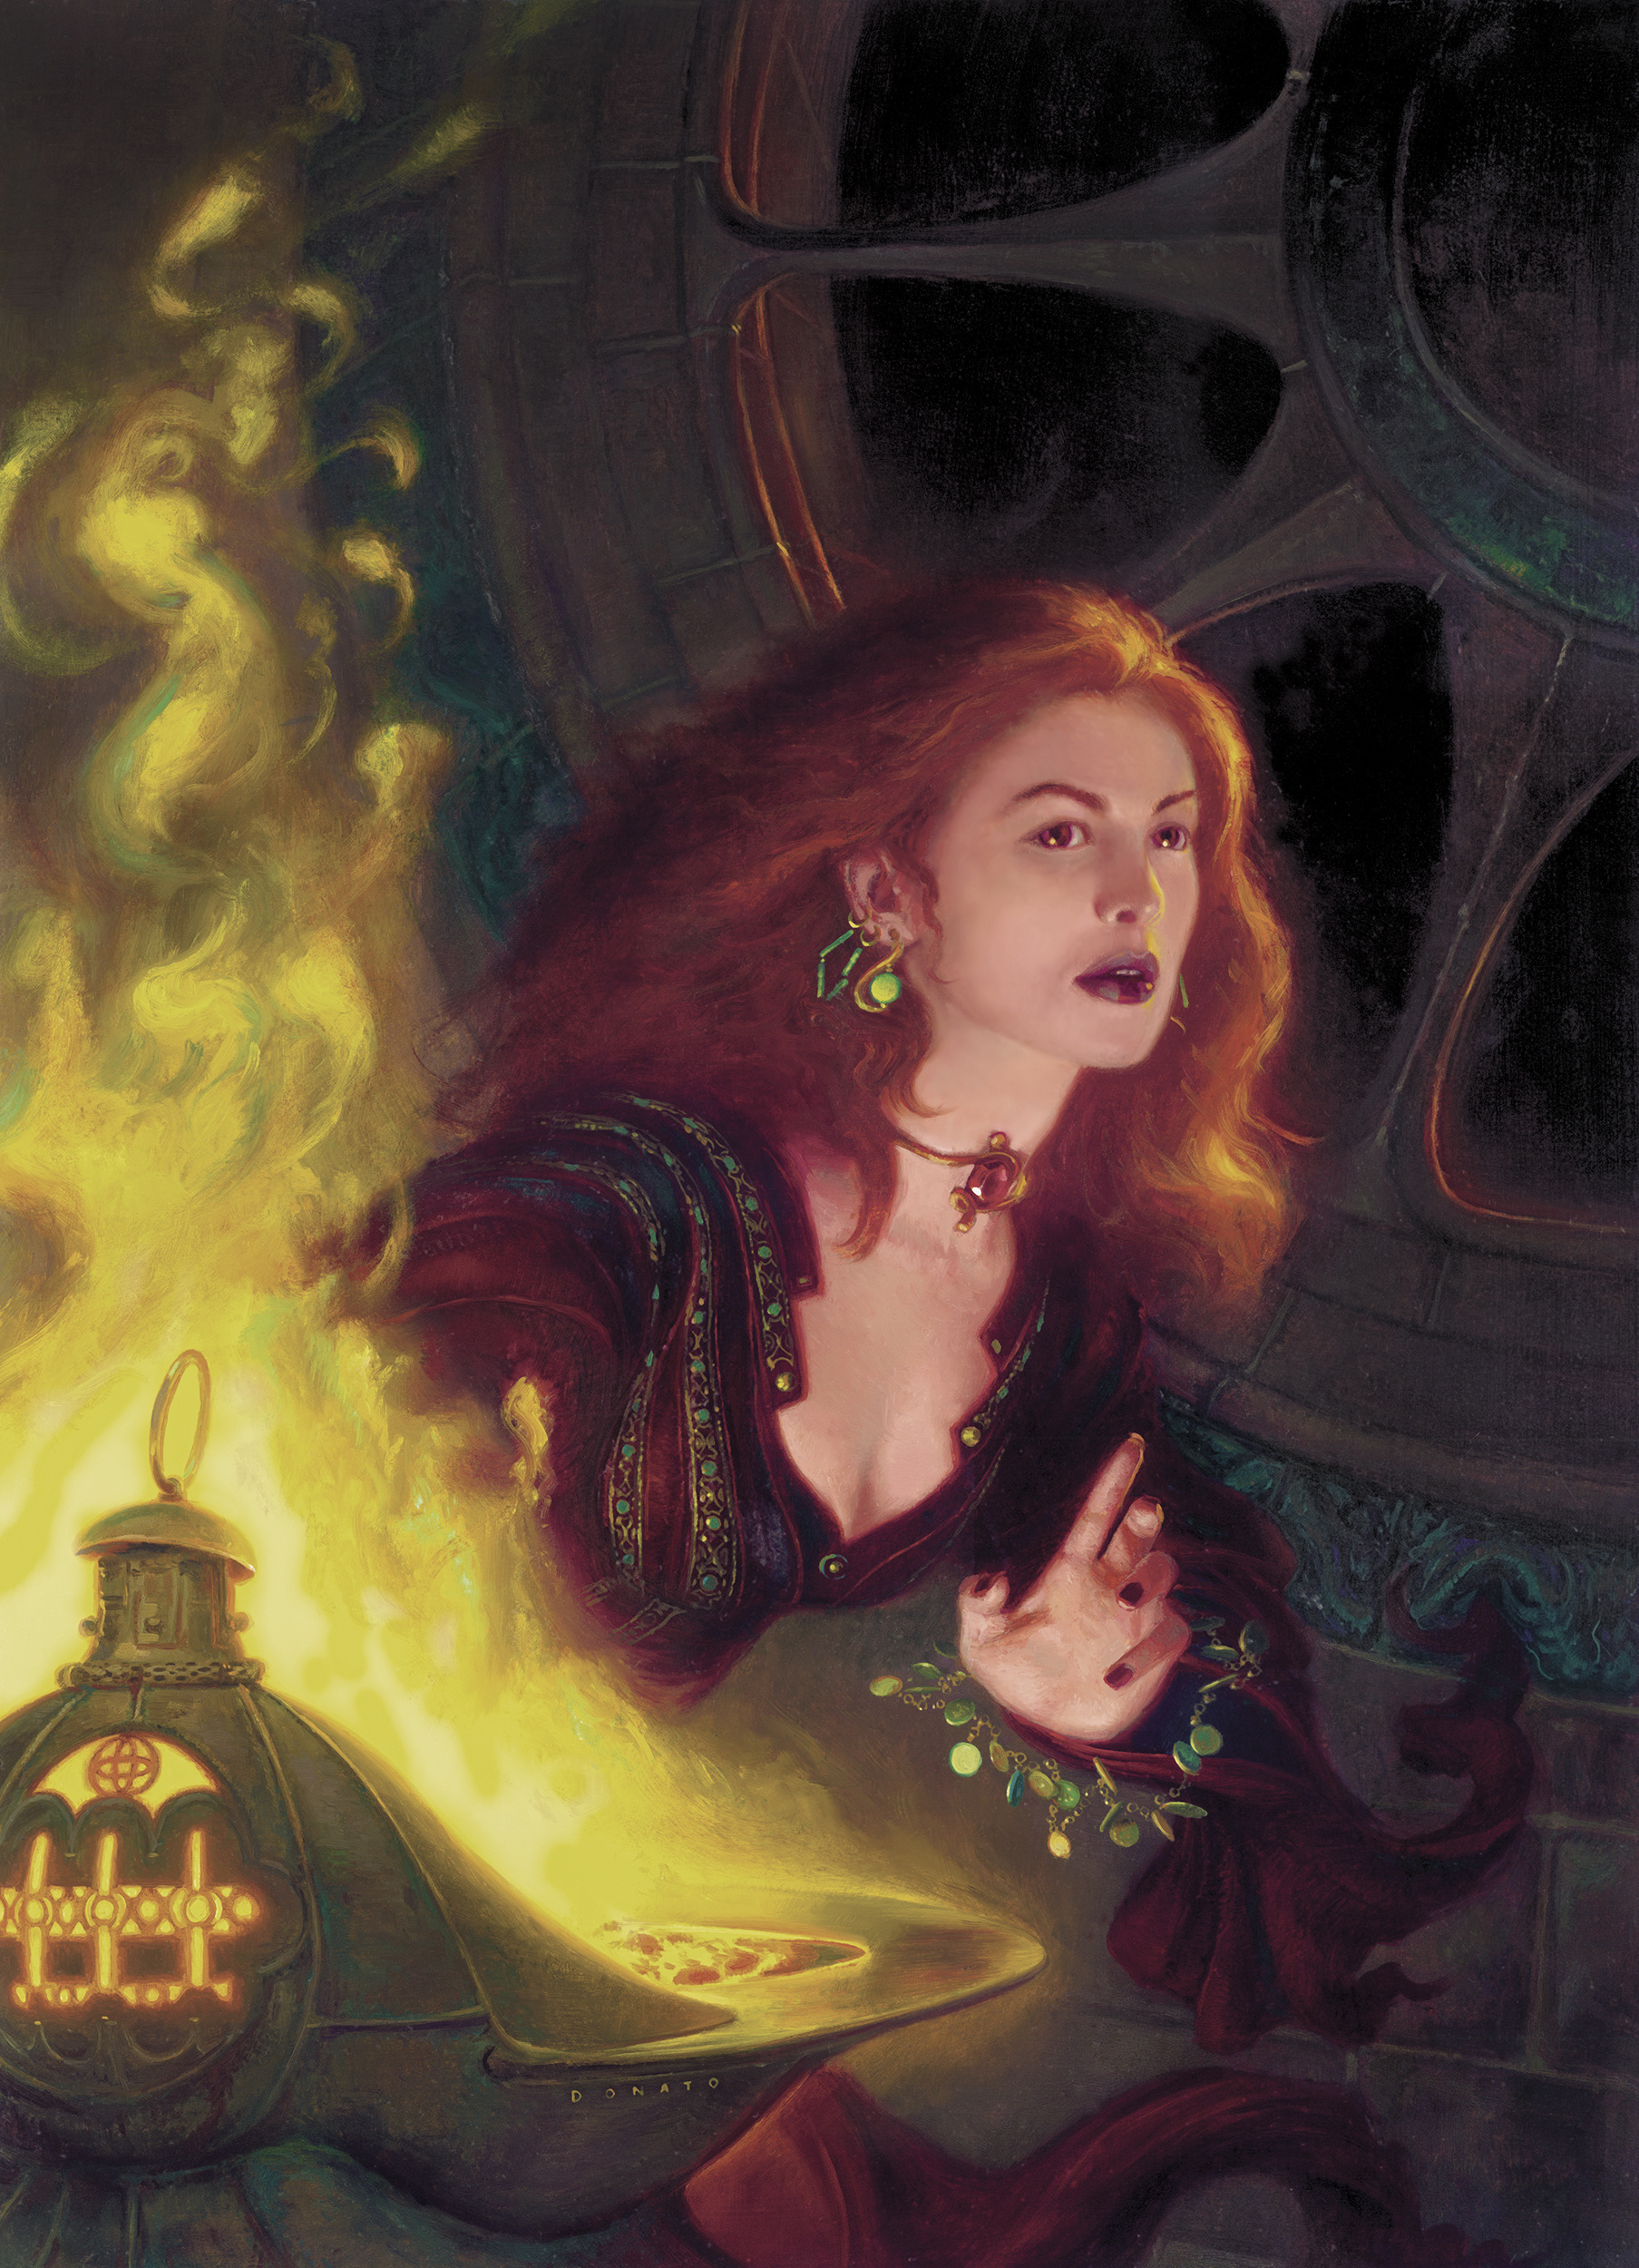 Melisandre
24" x 20" Oil on Panel 2006
cover image for Dragon Magazine
collection of Kirk and Leah Dilbert